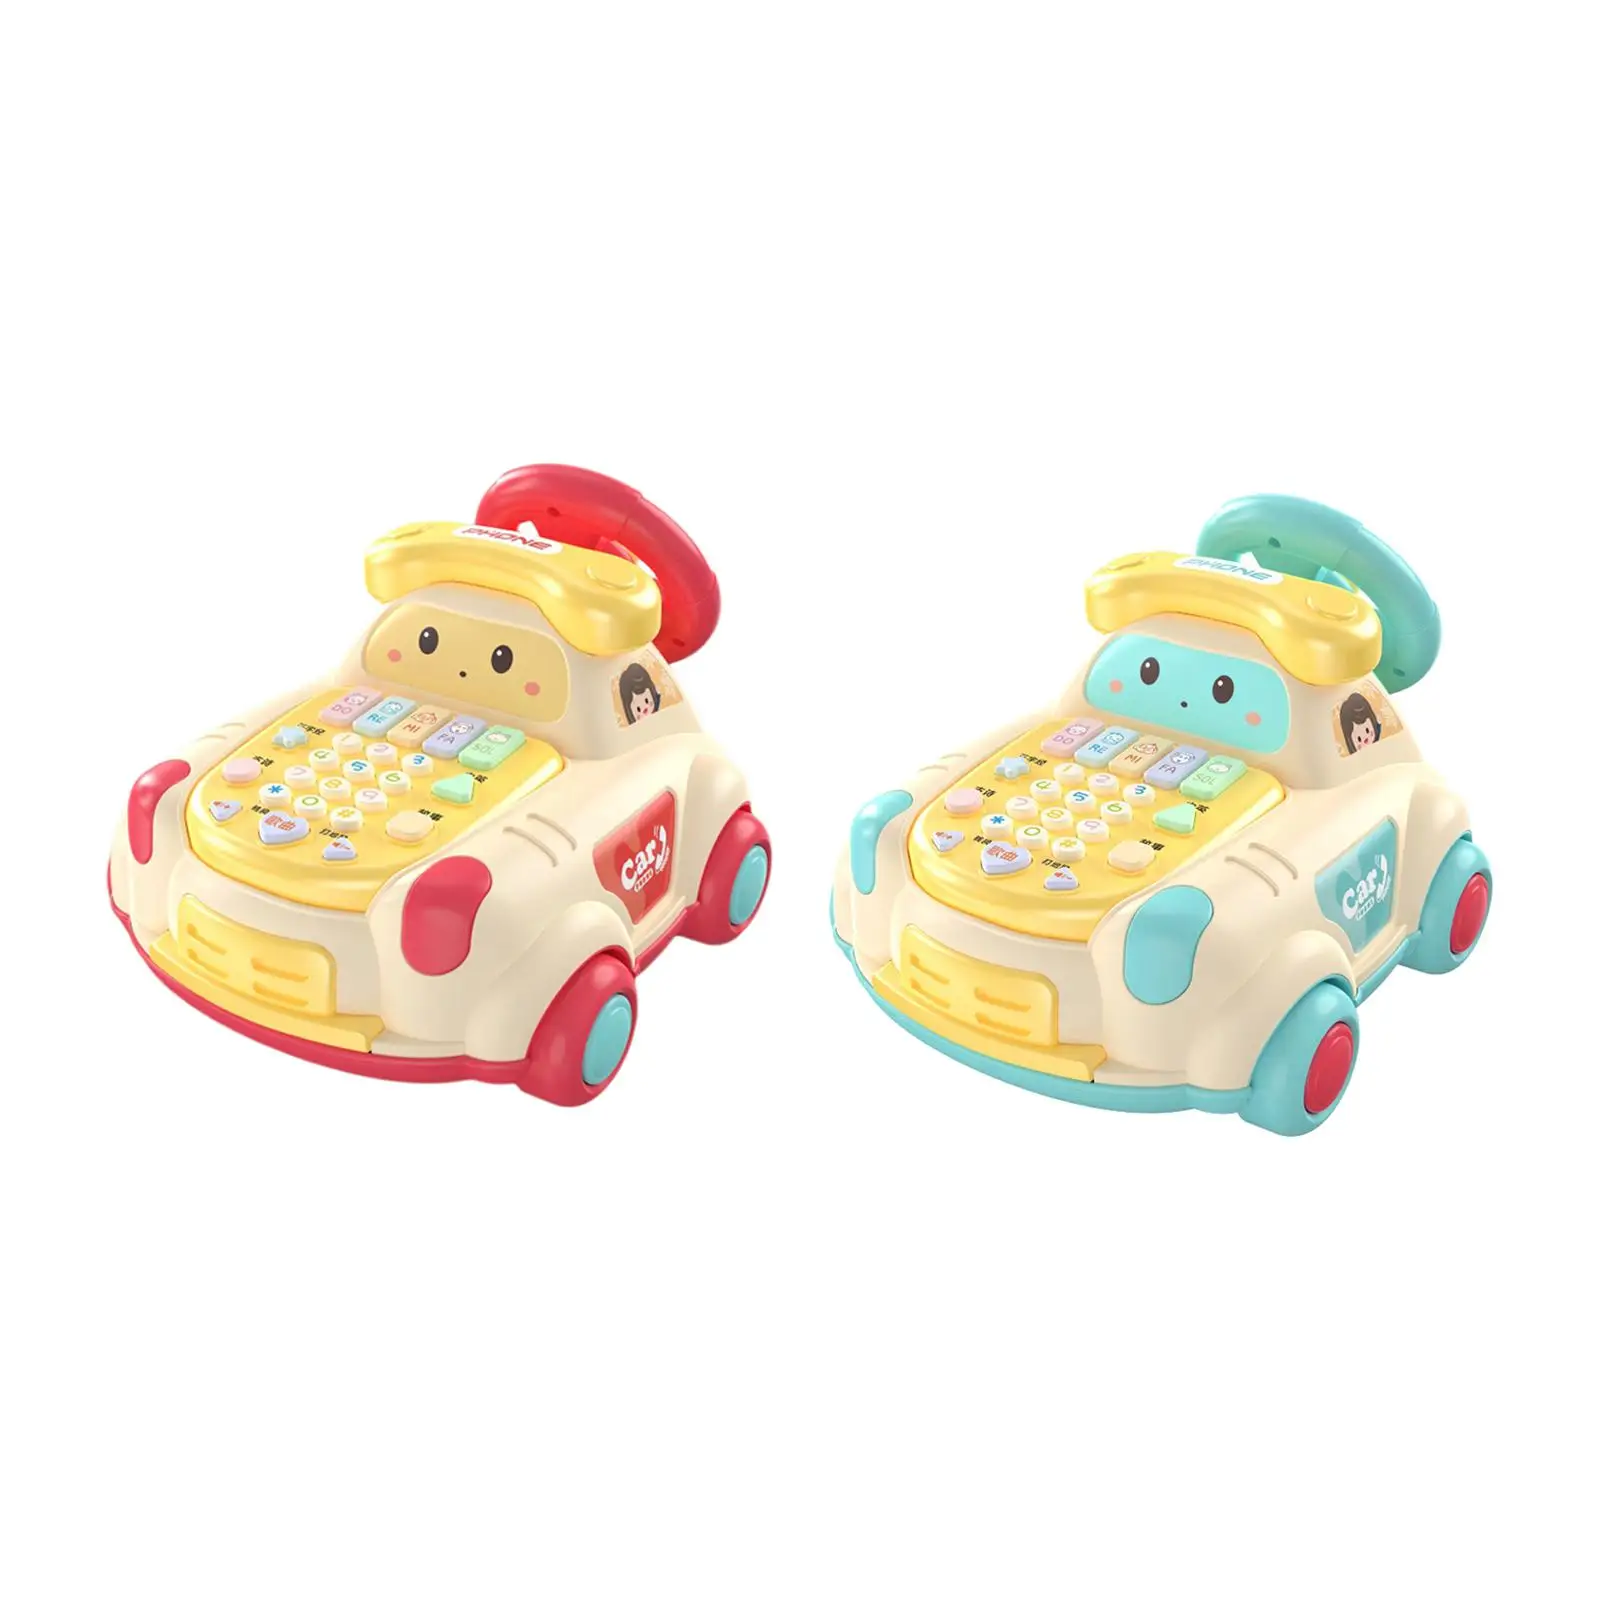 toddlers Steering Wheel Car Multifunctional Movable Fine Motor Skills Baby Telephone Toy for Game Development Activity Preschool